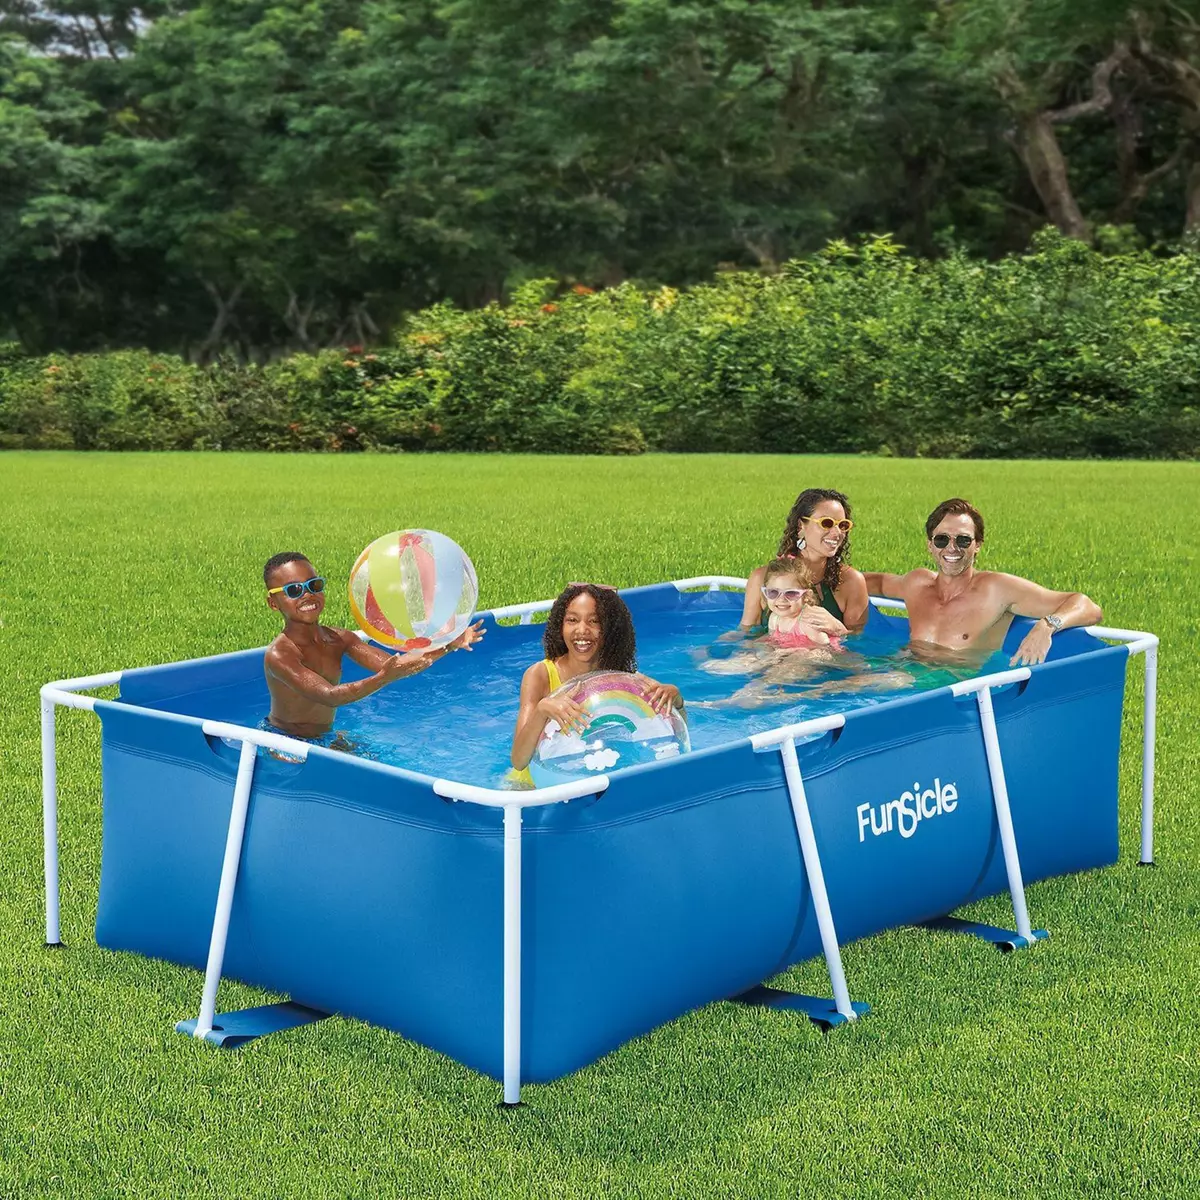 FUNSICLE Piscine tubulaire rectangulaire Funsicle  2,60 m x 1,60 m x 0,66 m